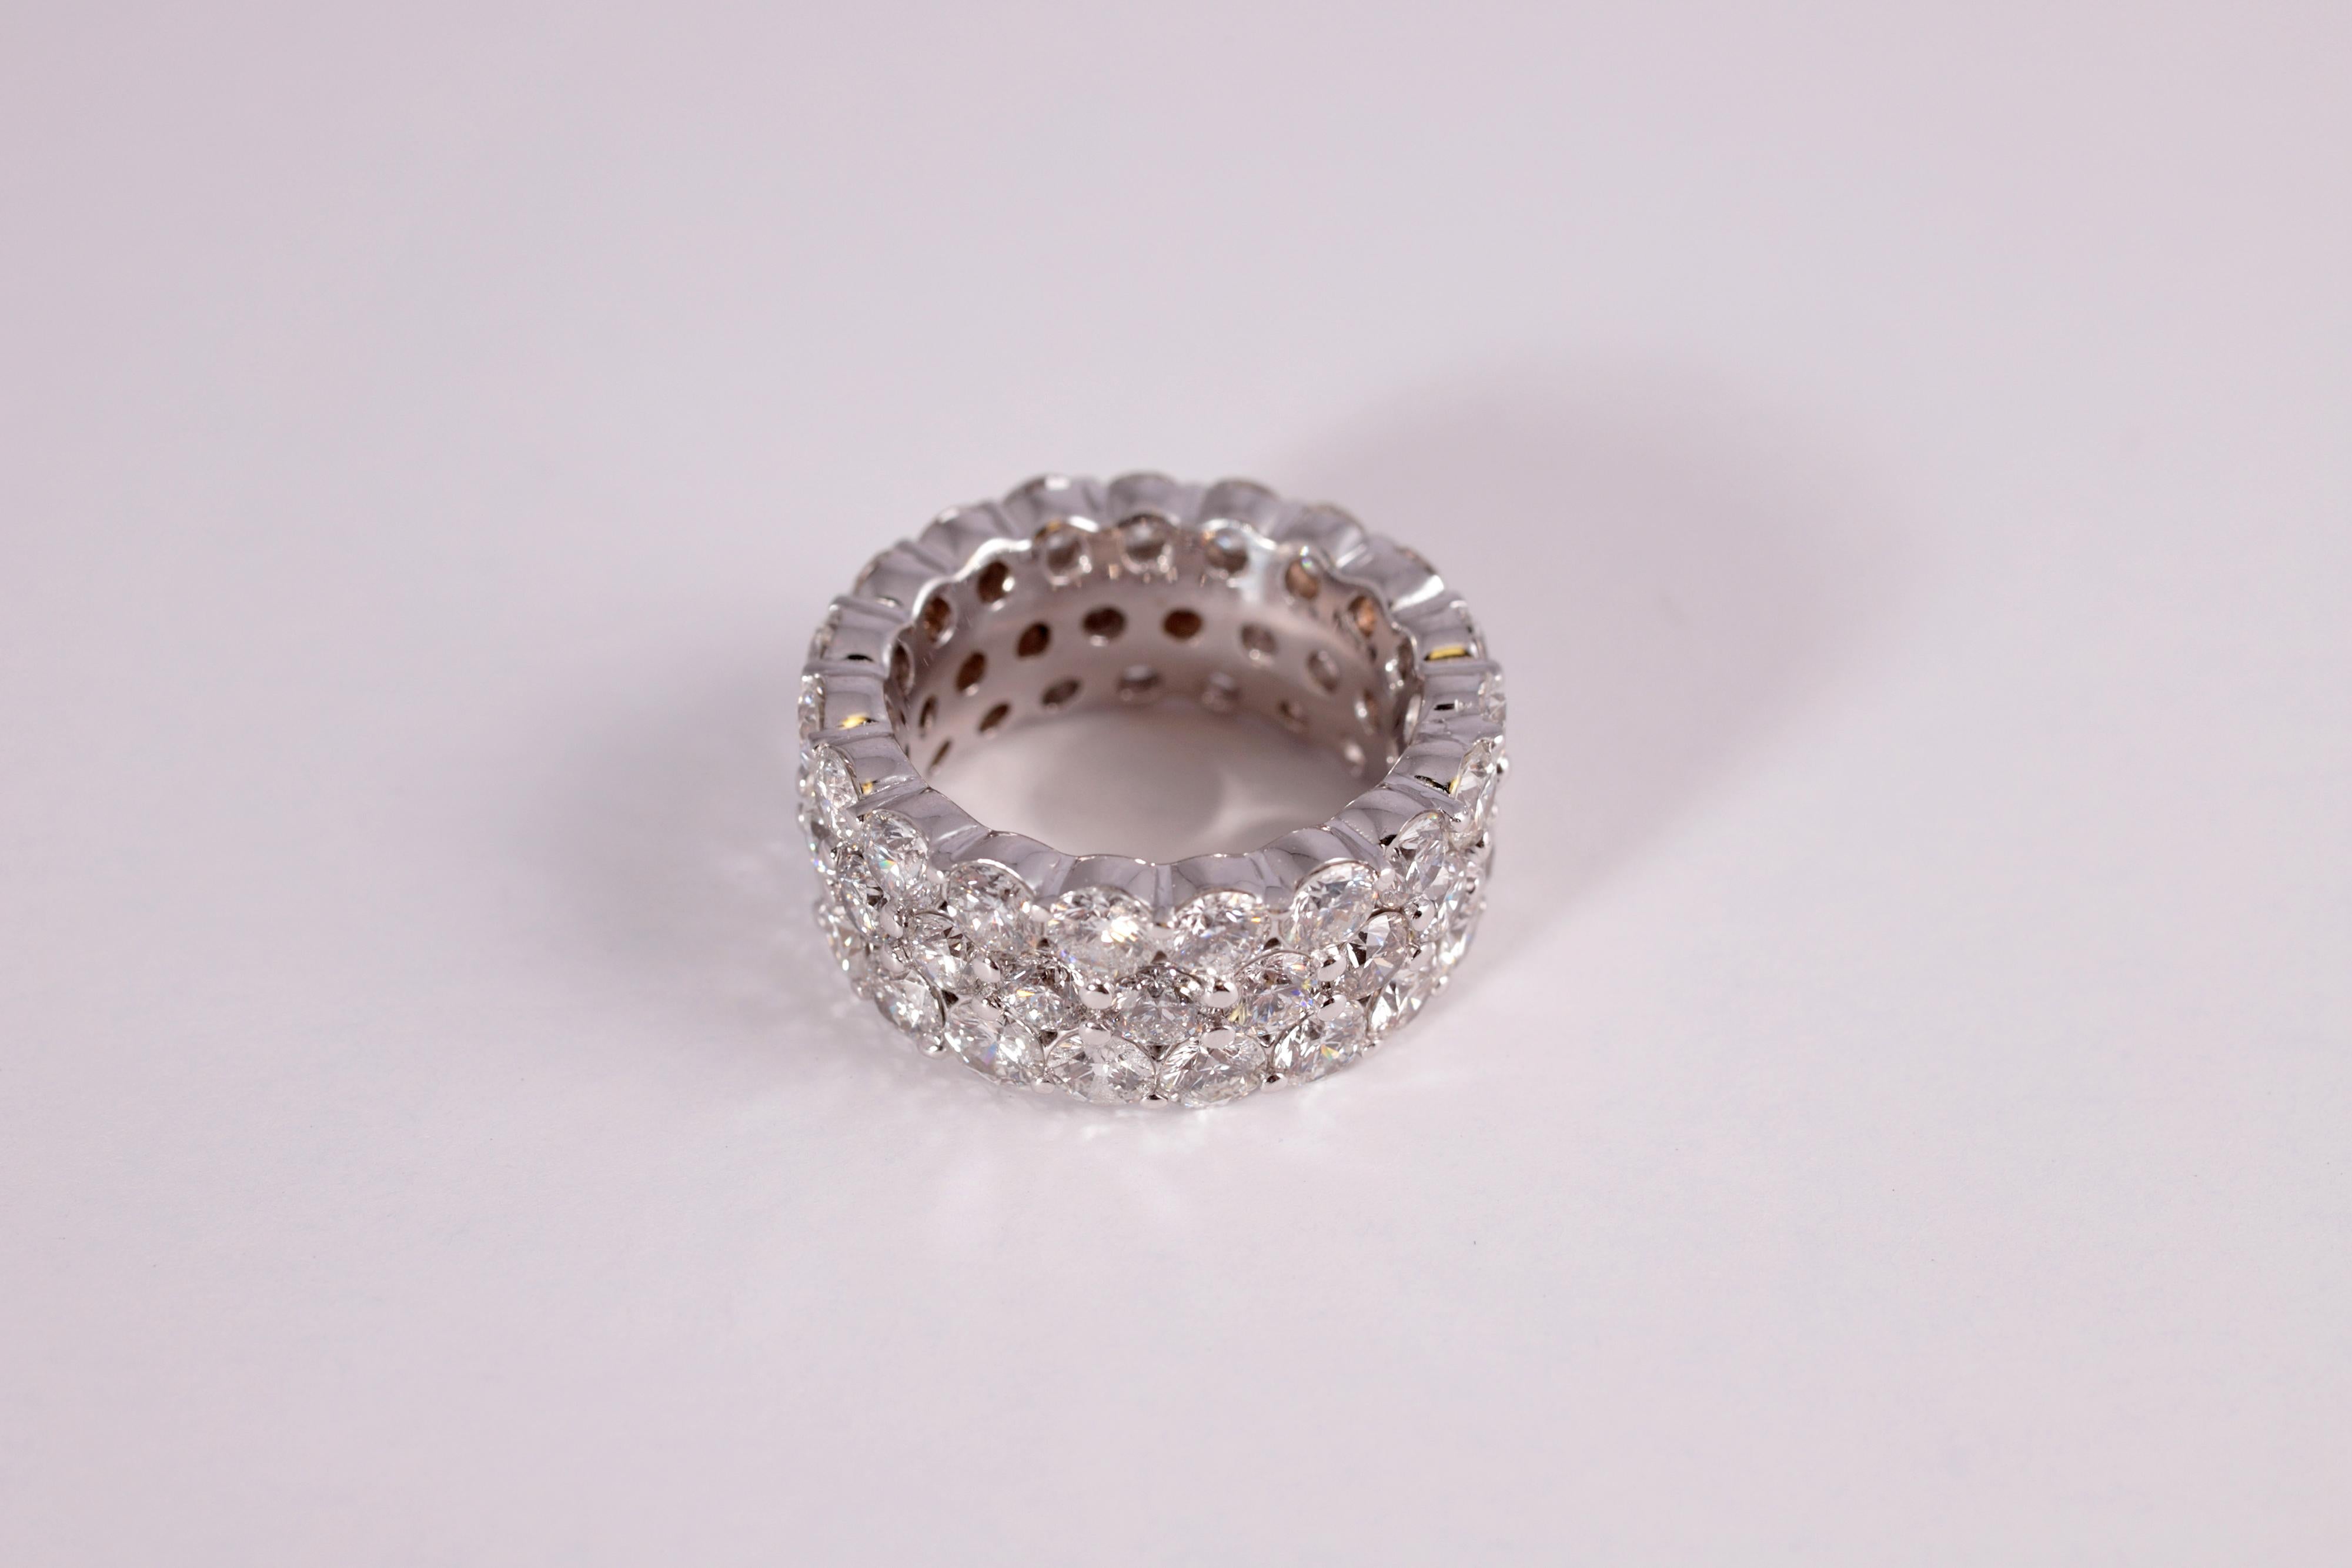 Sparkling does not even begin to describe this beauty!  Fifty-six shared prong, round diamonds make up this stunning ring, all in 18 karat white gold. Size 6 1/2.